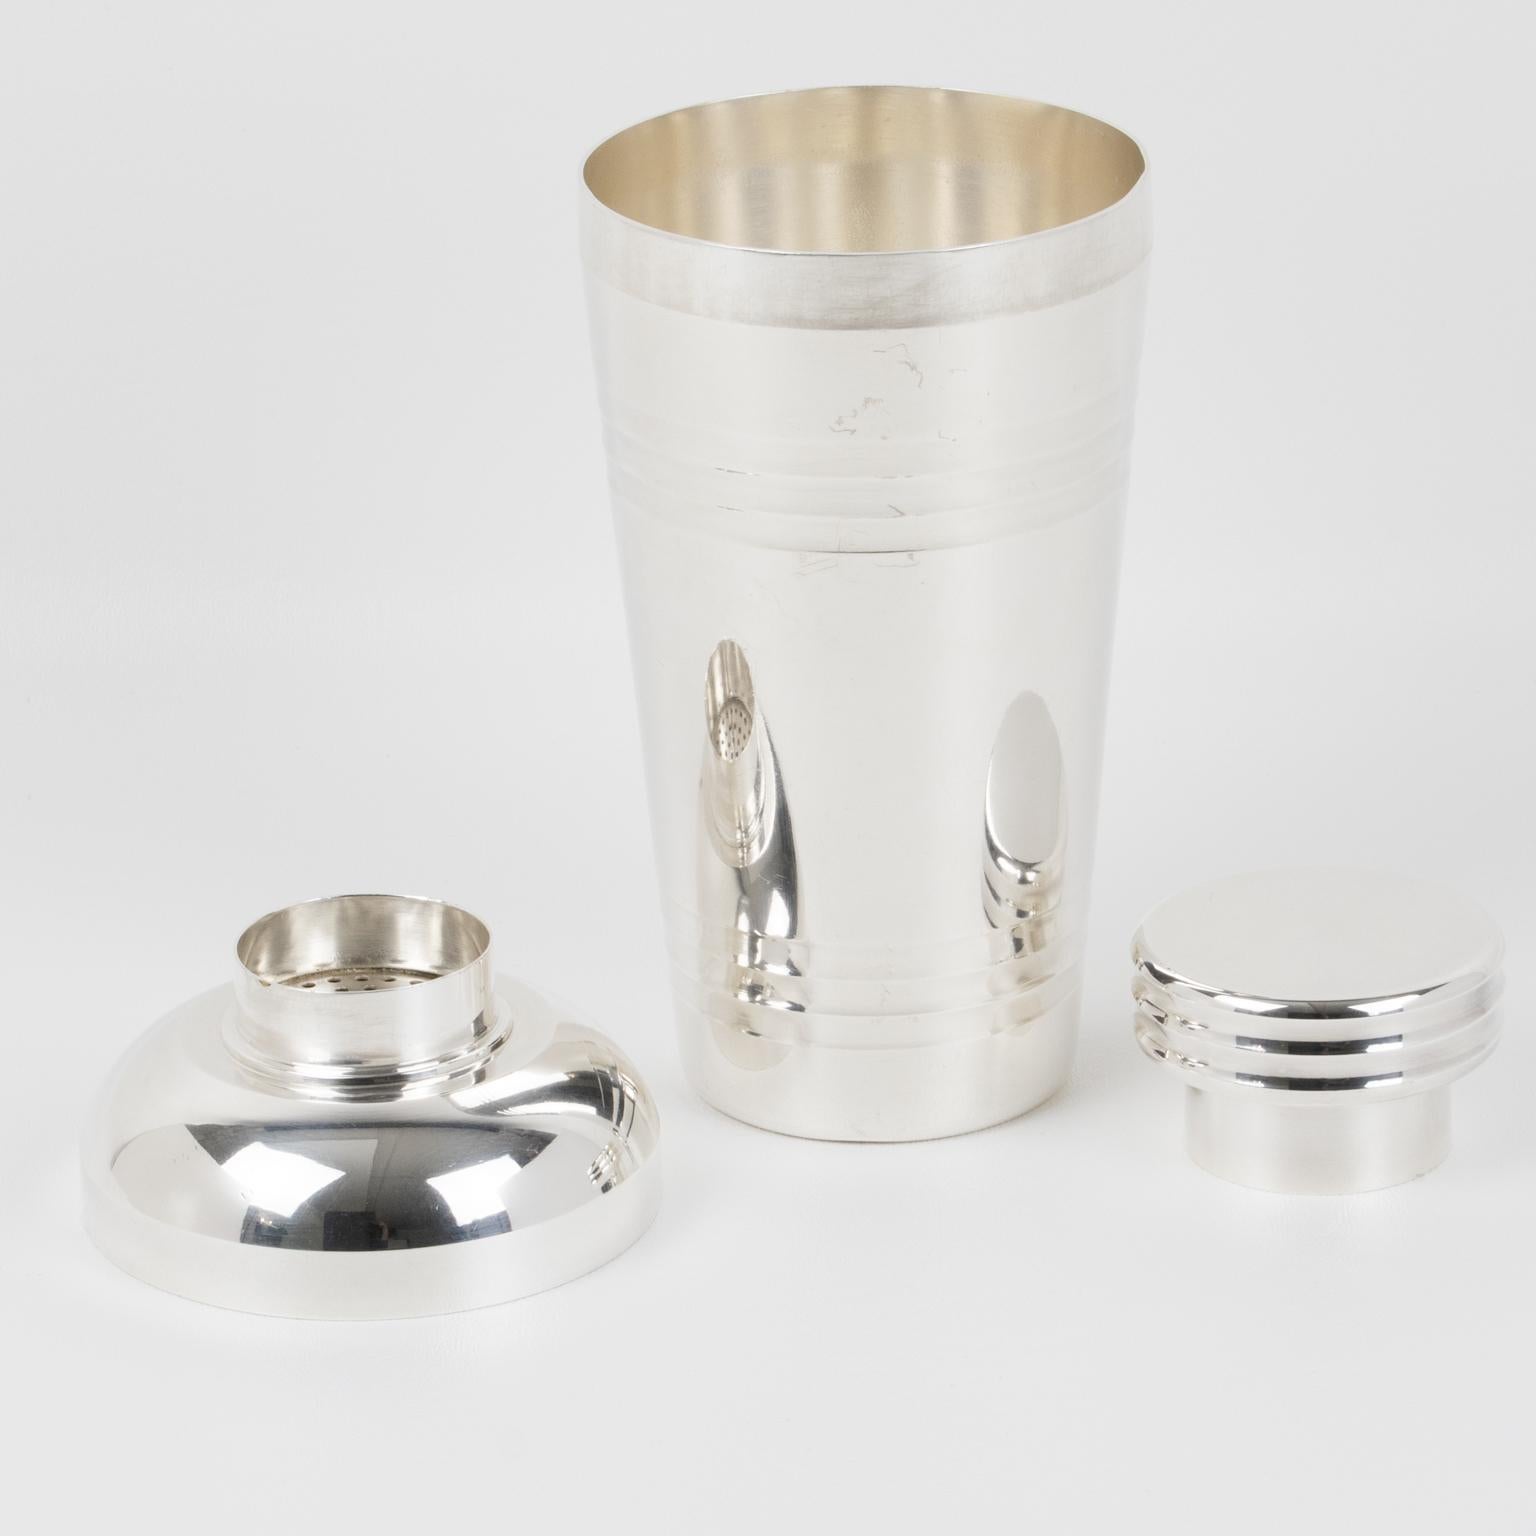 This elegant French Art Deco silver plate cylindrical cocktail or Martini shaker was designed by silversmith Lagarde et Fortin, Paris (Saint Medard Successor). The three-sectioned cocktail shaker has a removable cap and strainer. The piece features